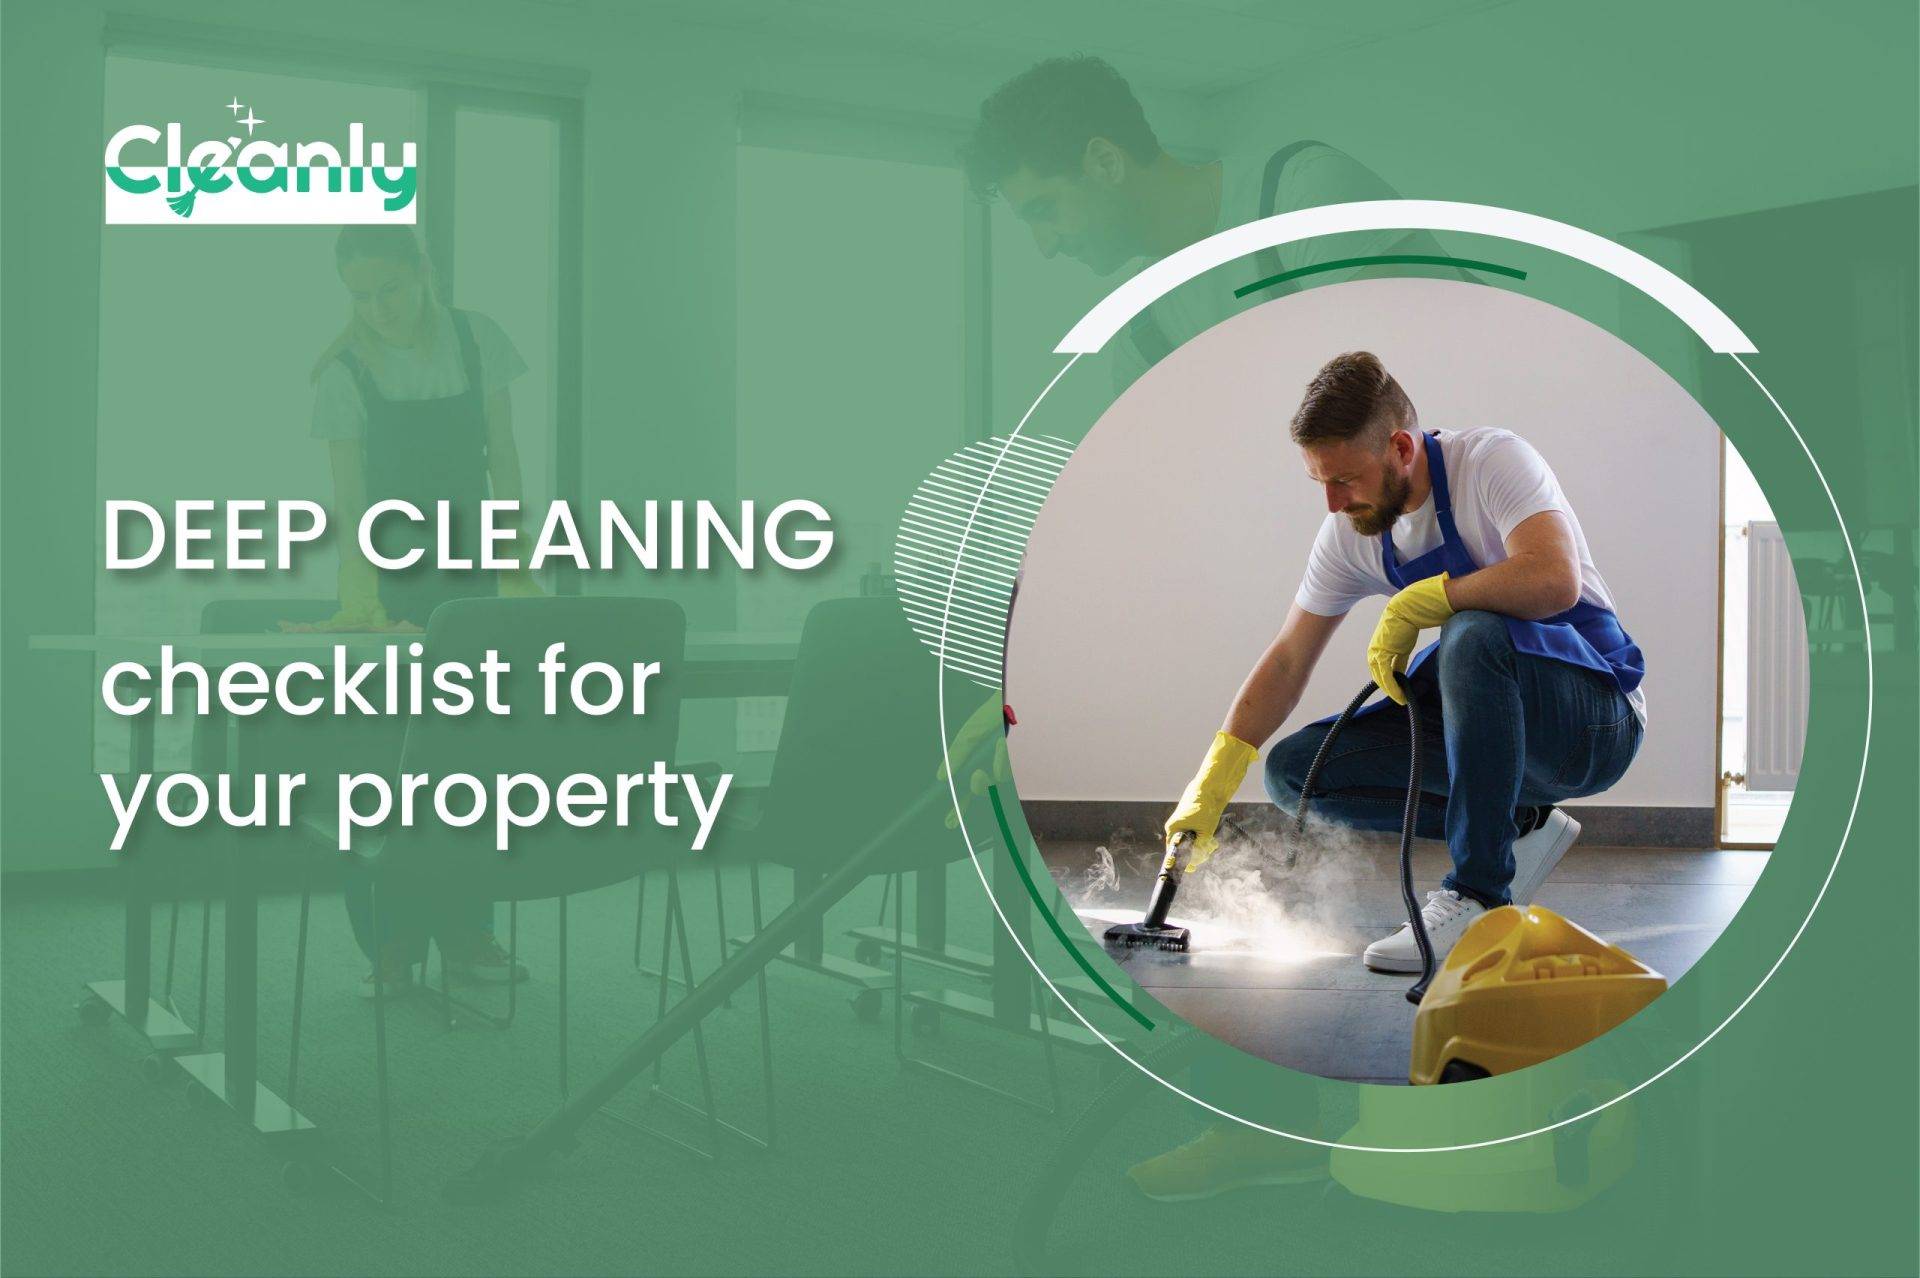 Deep cleaning checklist for your property